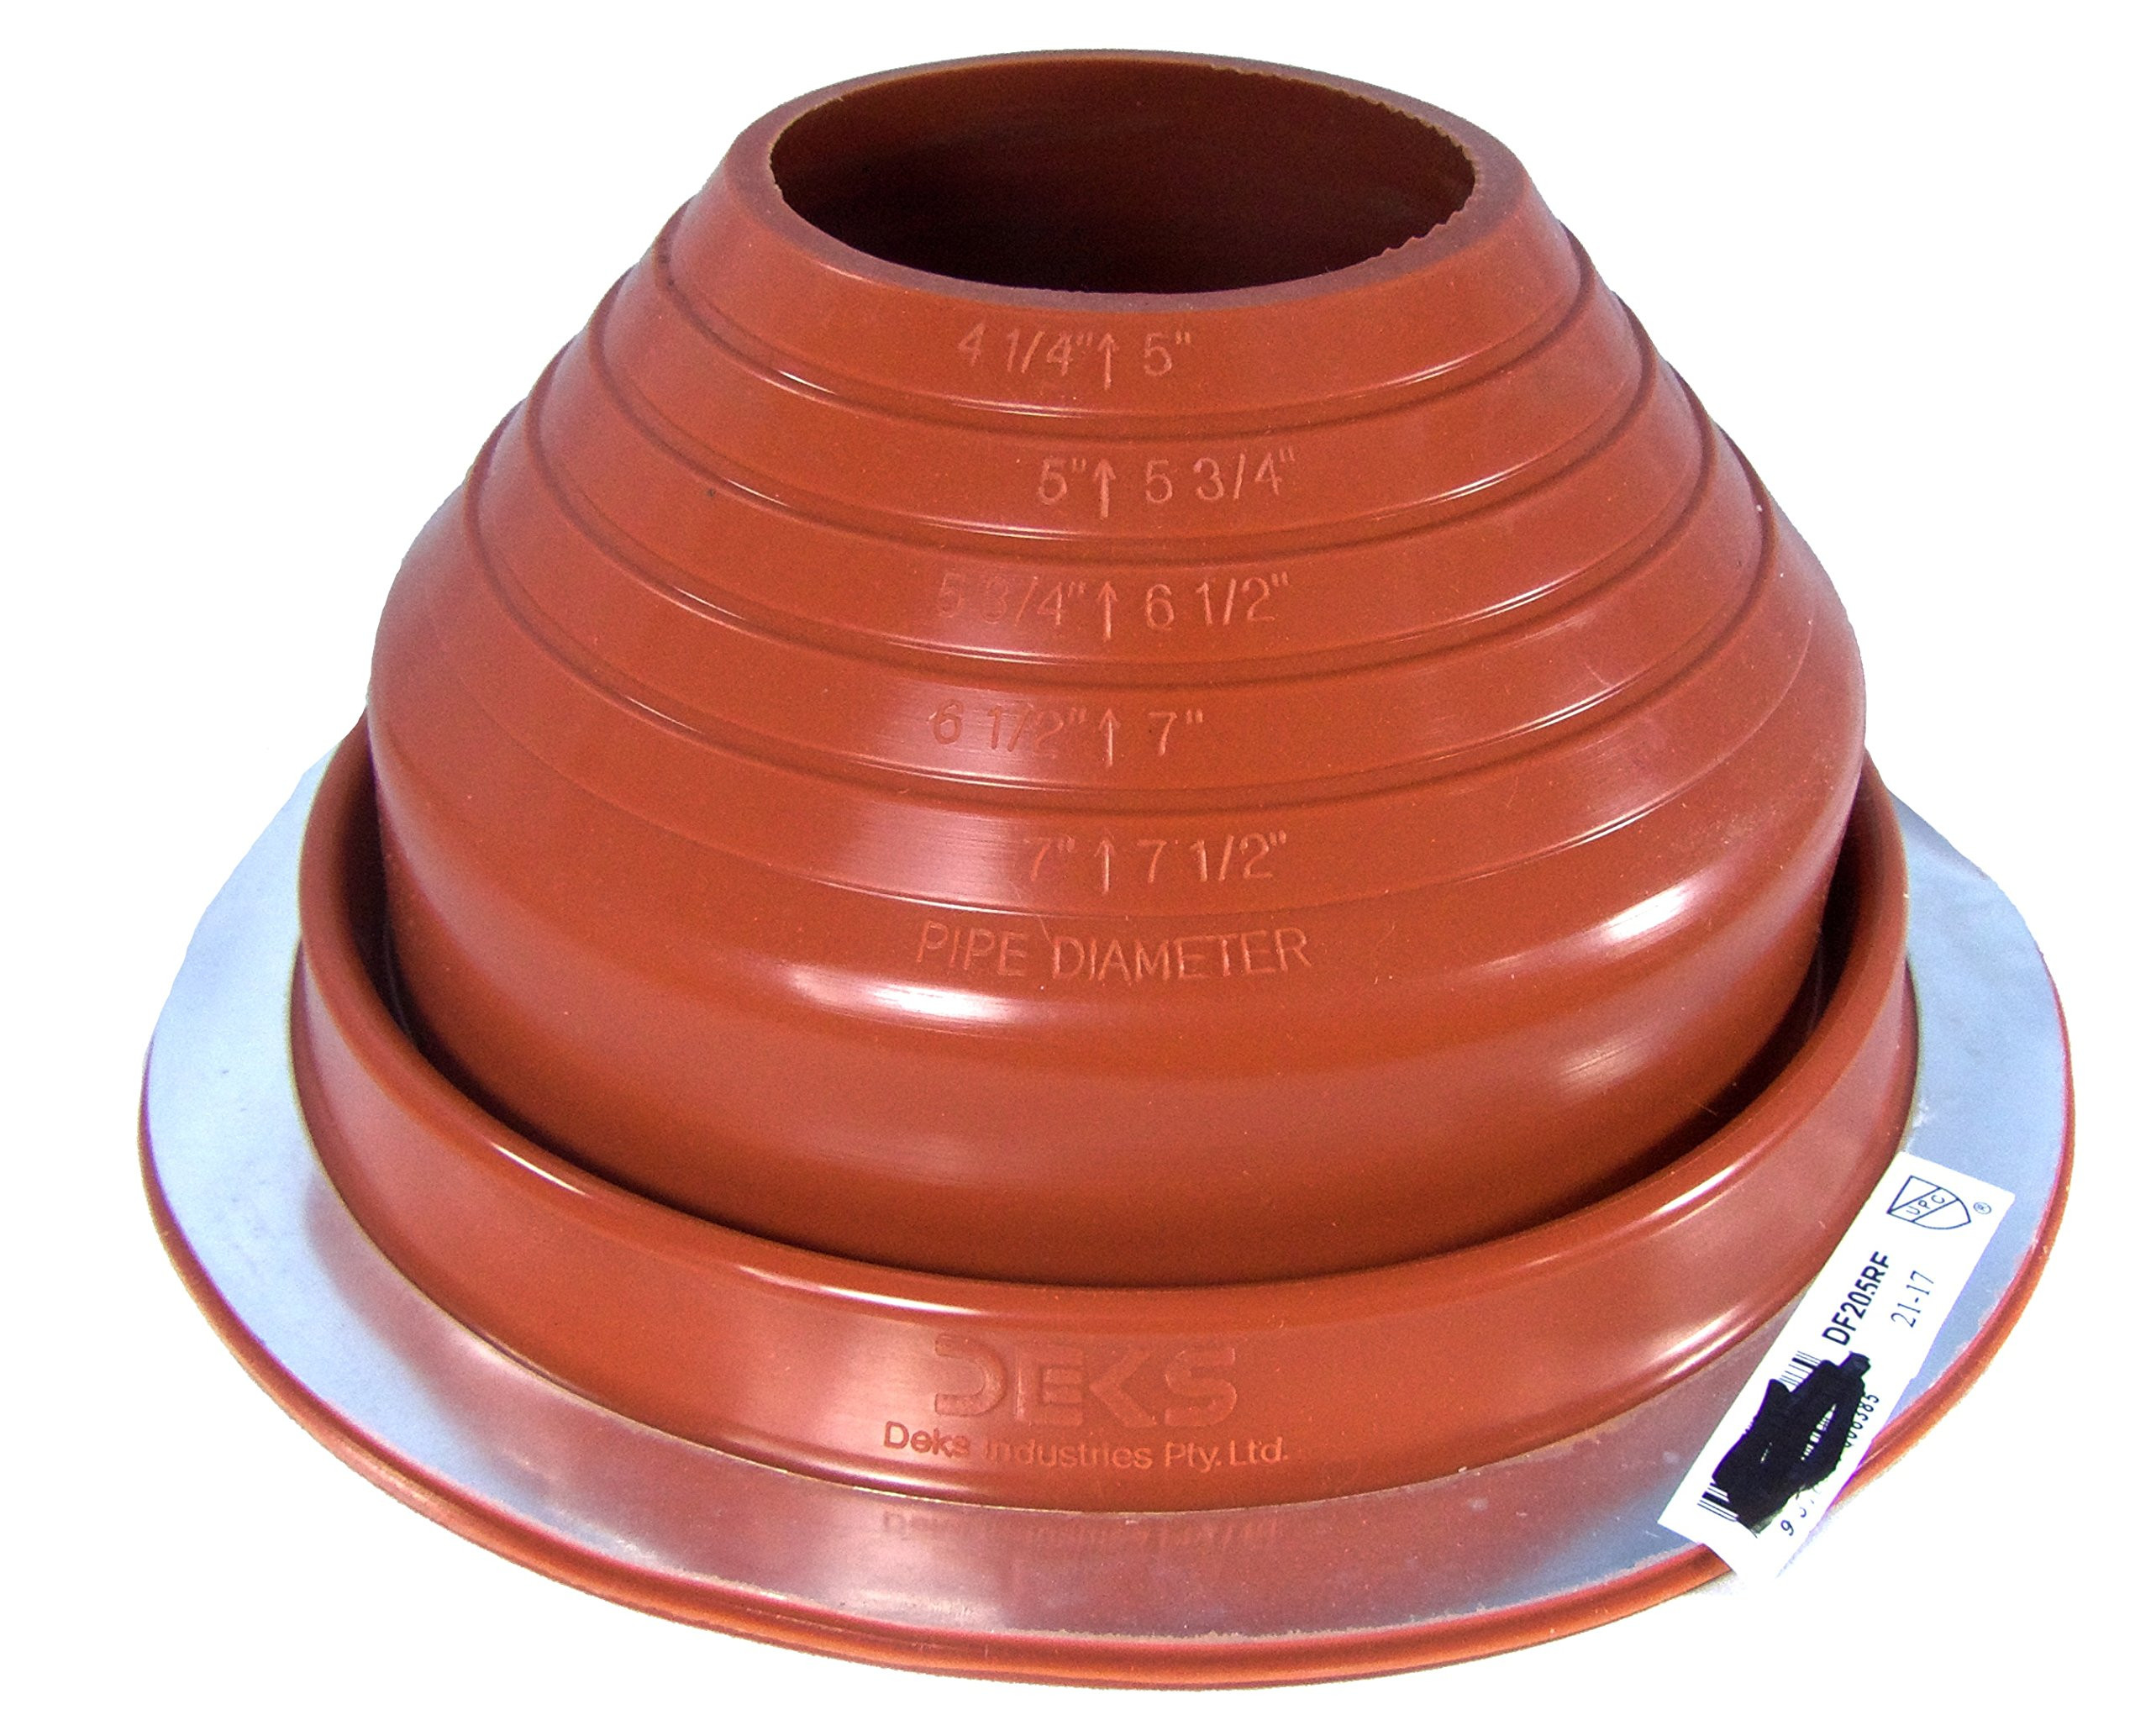 20 Nice Extra Large Round Vase 2024 free download extra large round vase of best rated in roof flashings helpful customer reviews amazon com pertaining to dektite 5 red silicone metal roof pipe flashing round base pipe od 4 1 4 7 1 2